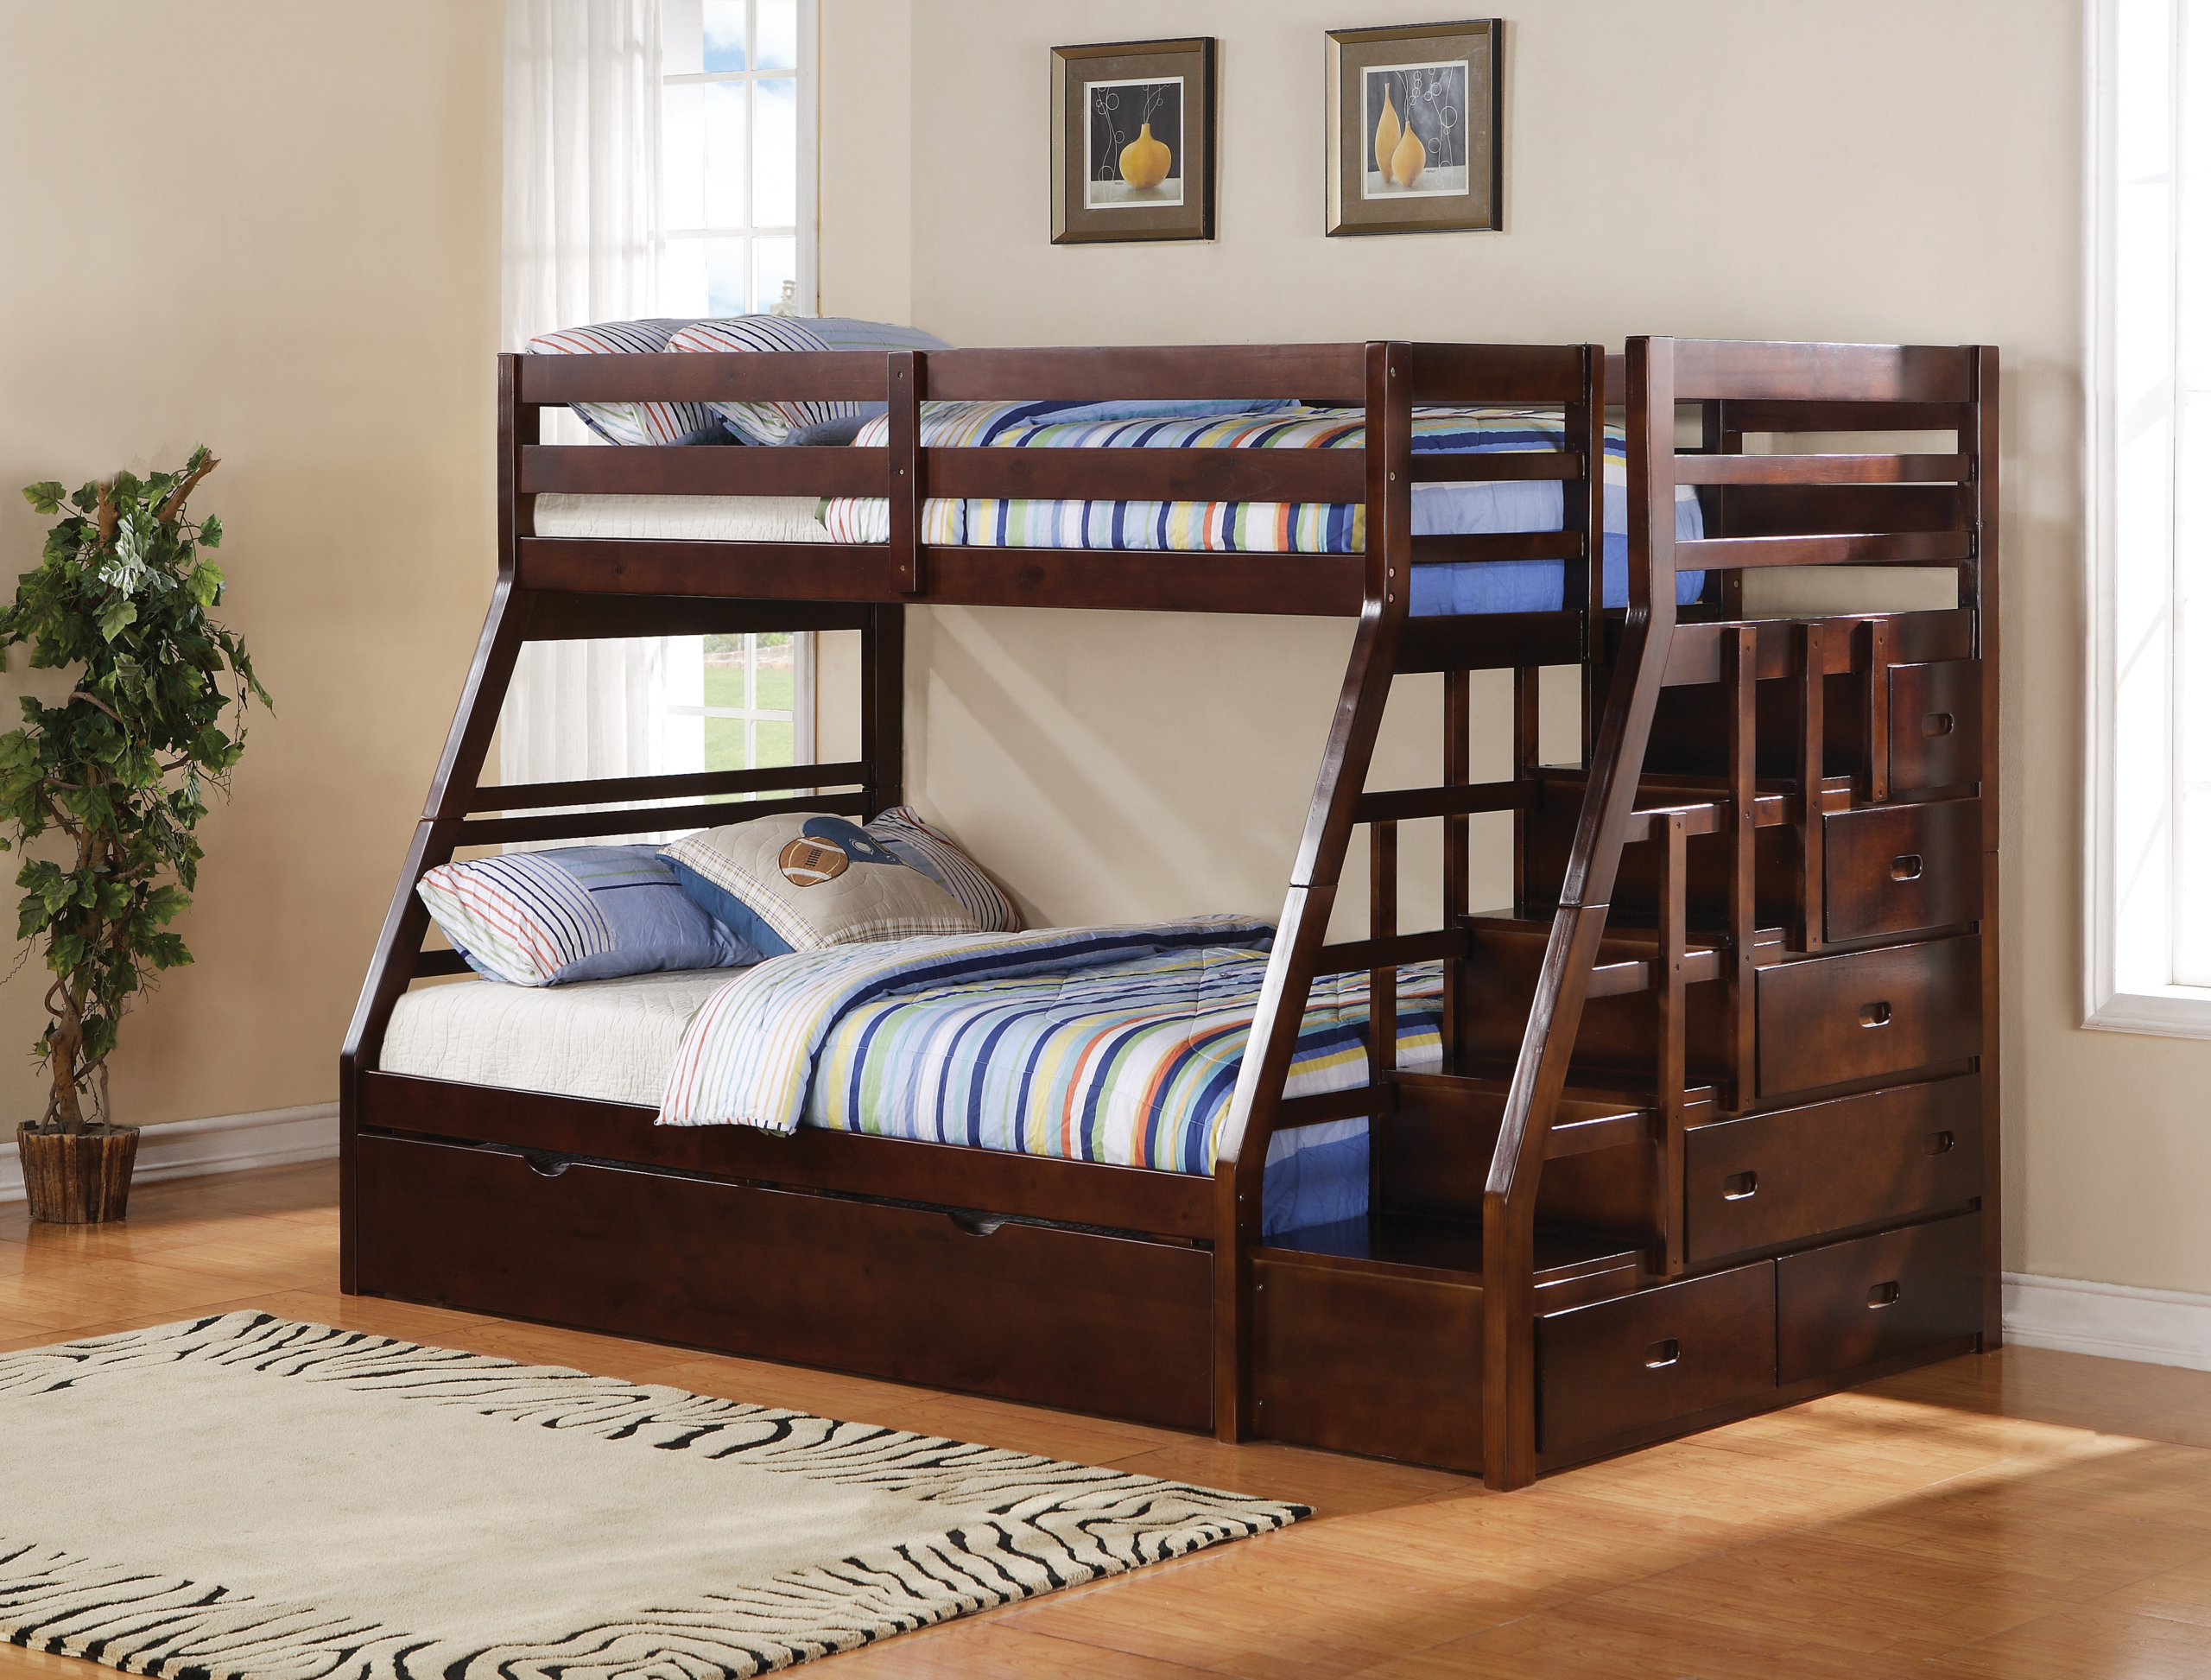 Acme 37015 Jason Twin/Full Bunk Bed with Storage Ladder and Trundle, Espresso Finish